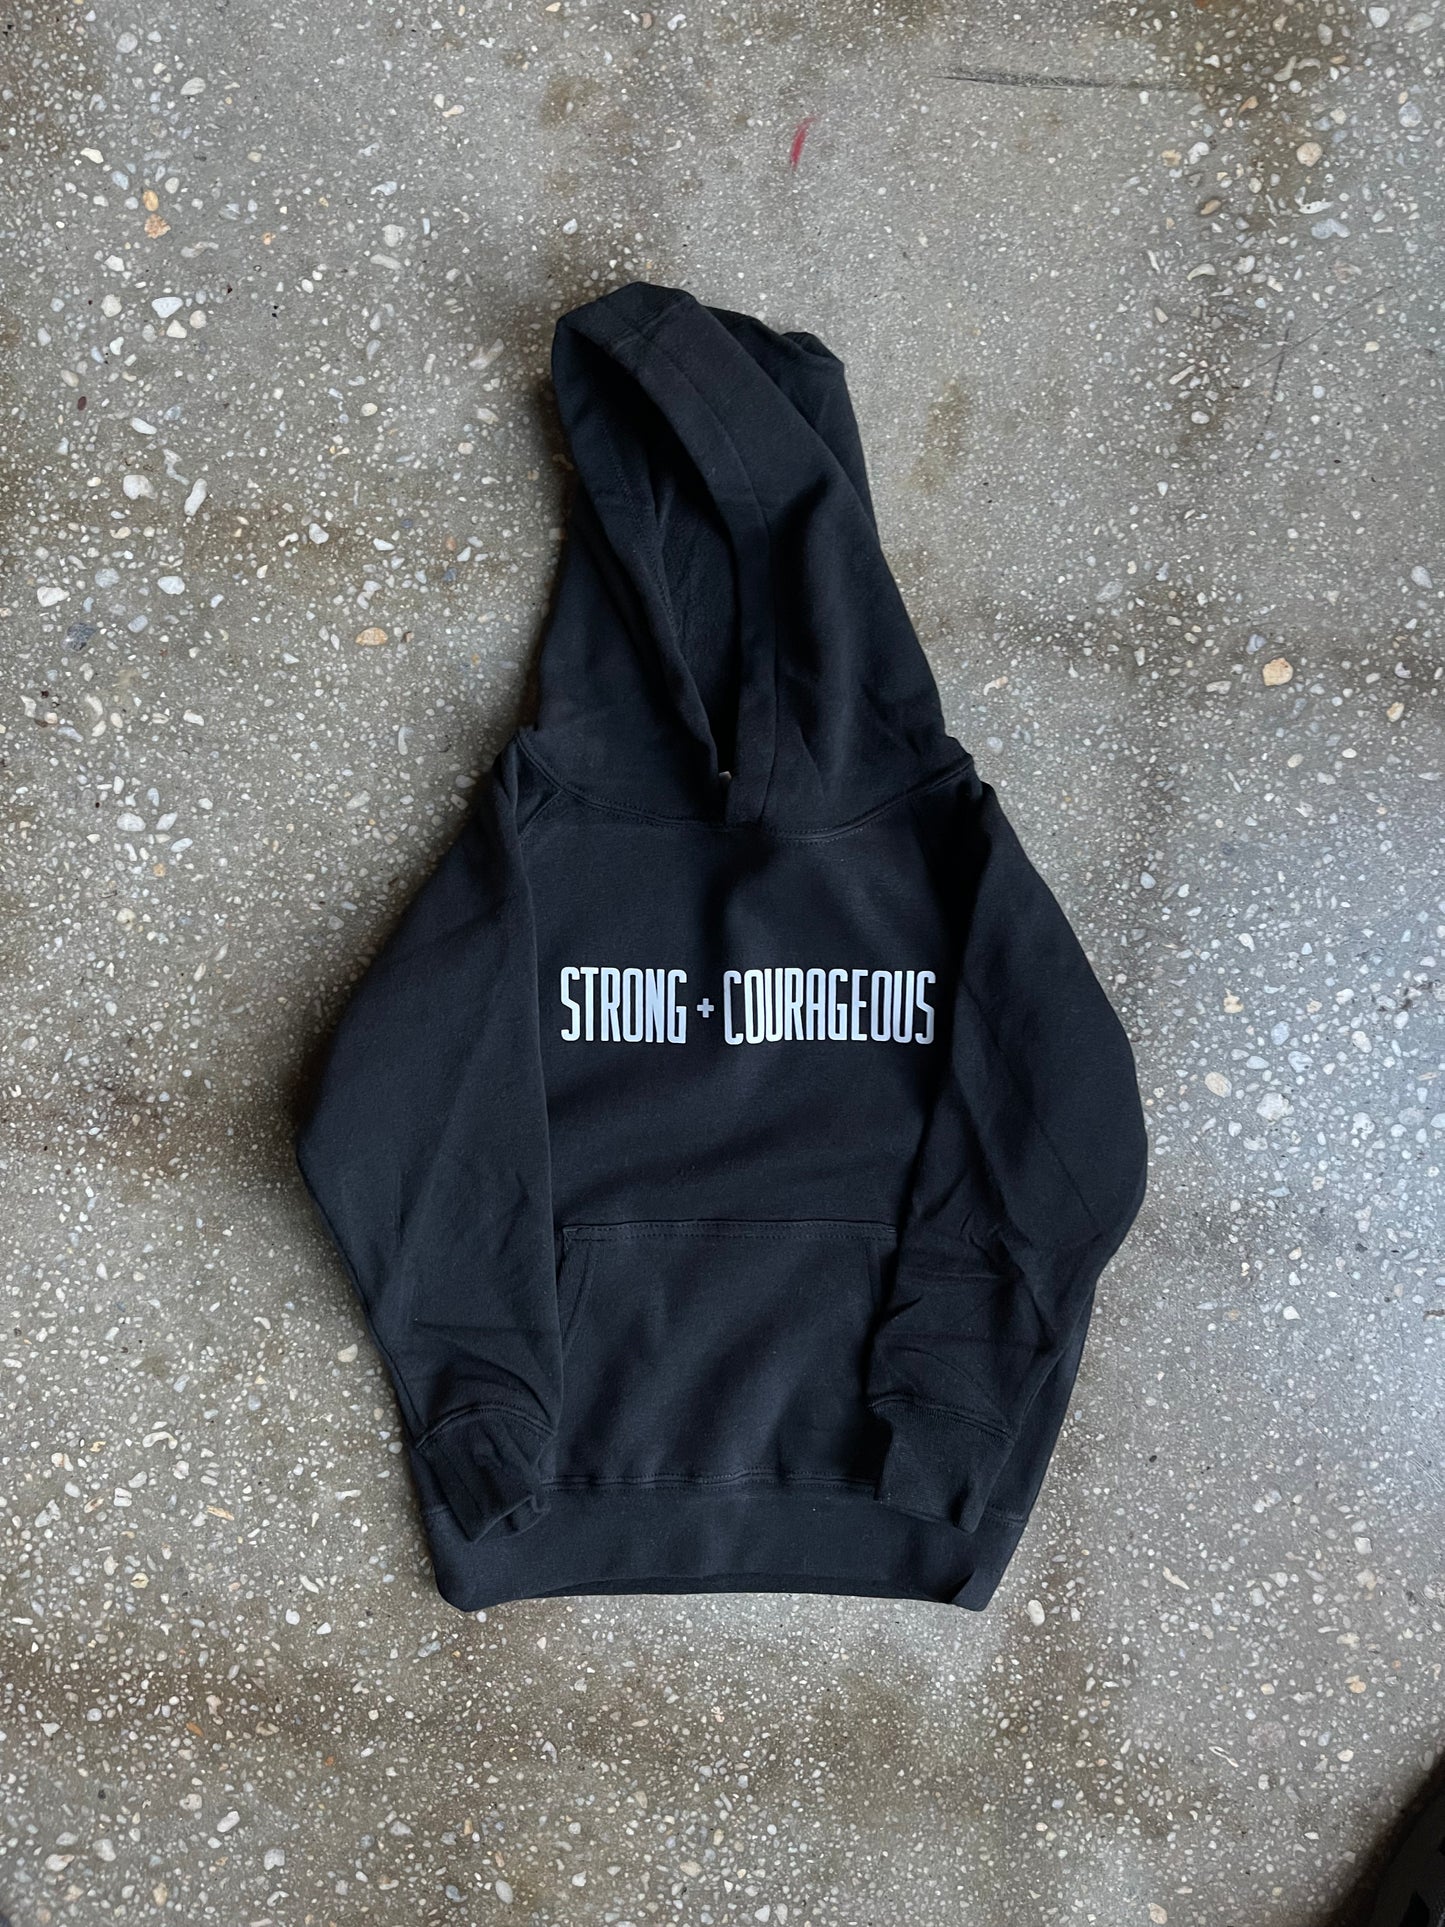 Strong + Courageous Kids Hoodie